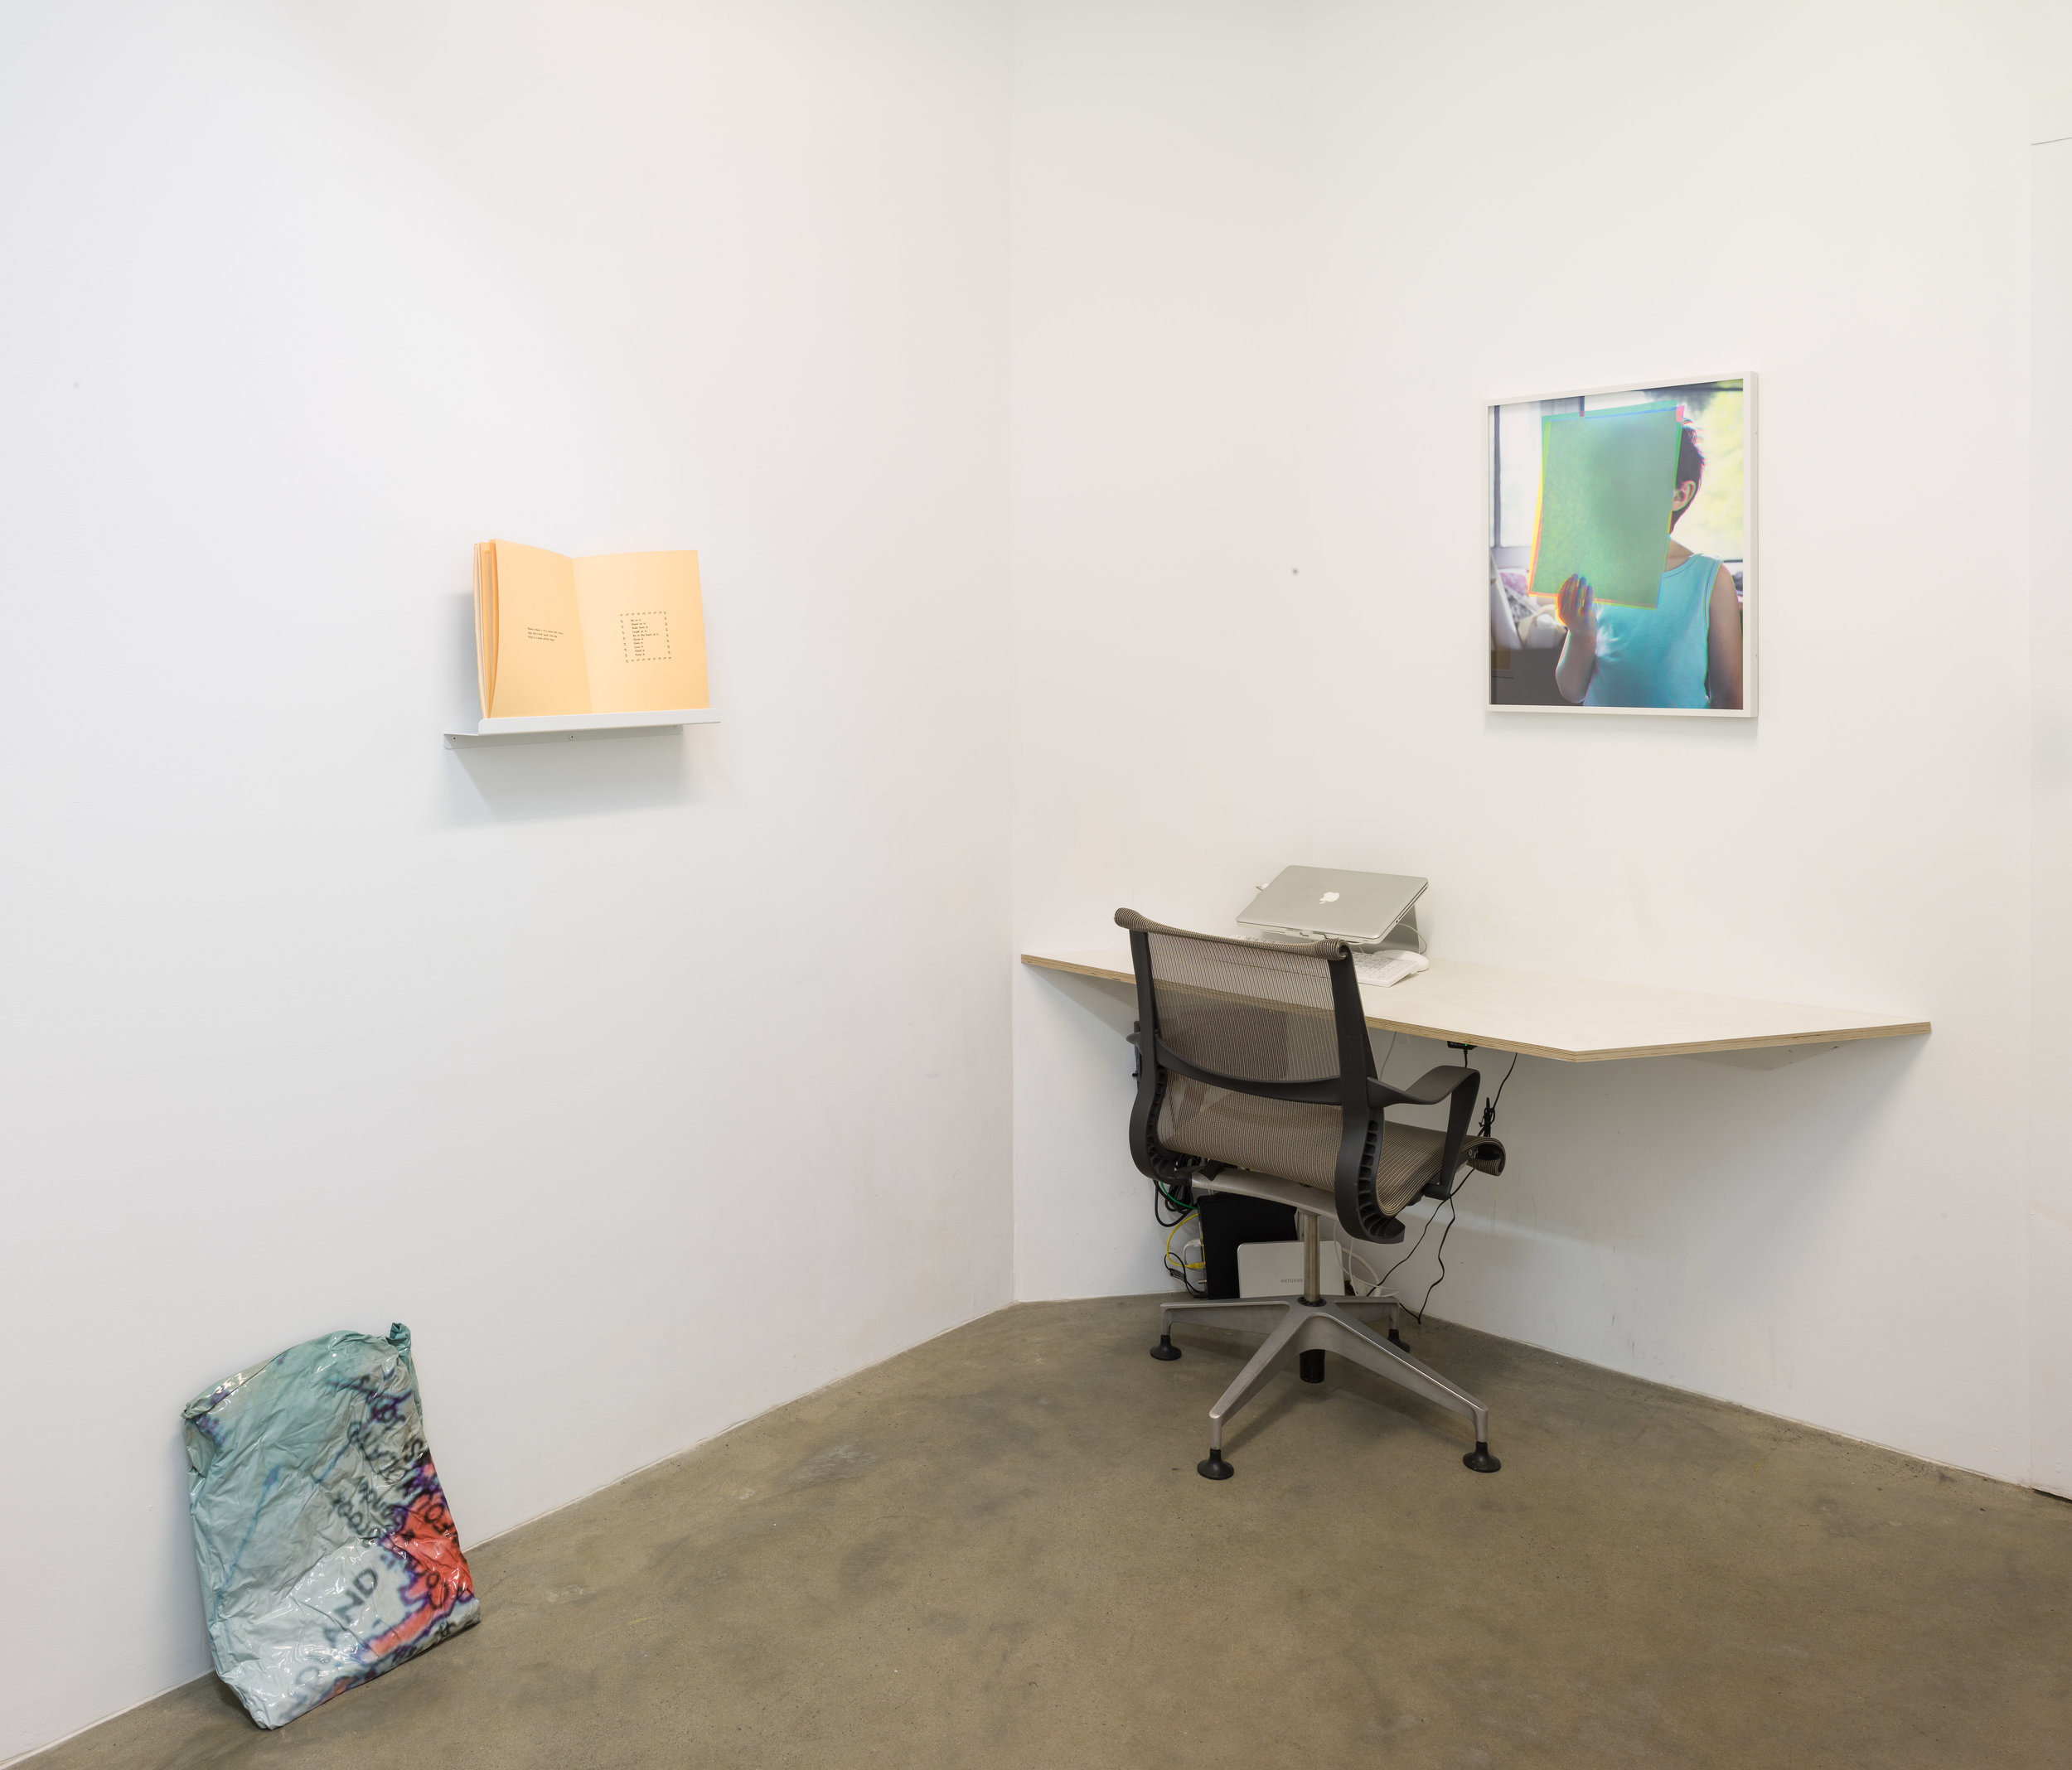 Installation view of group exhibition 'Crisp Edge, Fuzzy Border,' with artworks in various mediums